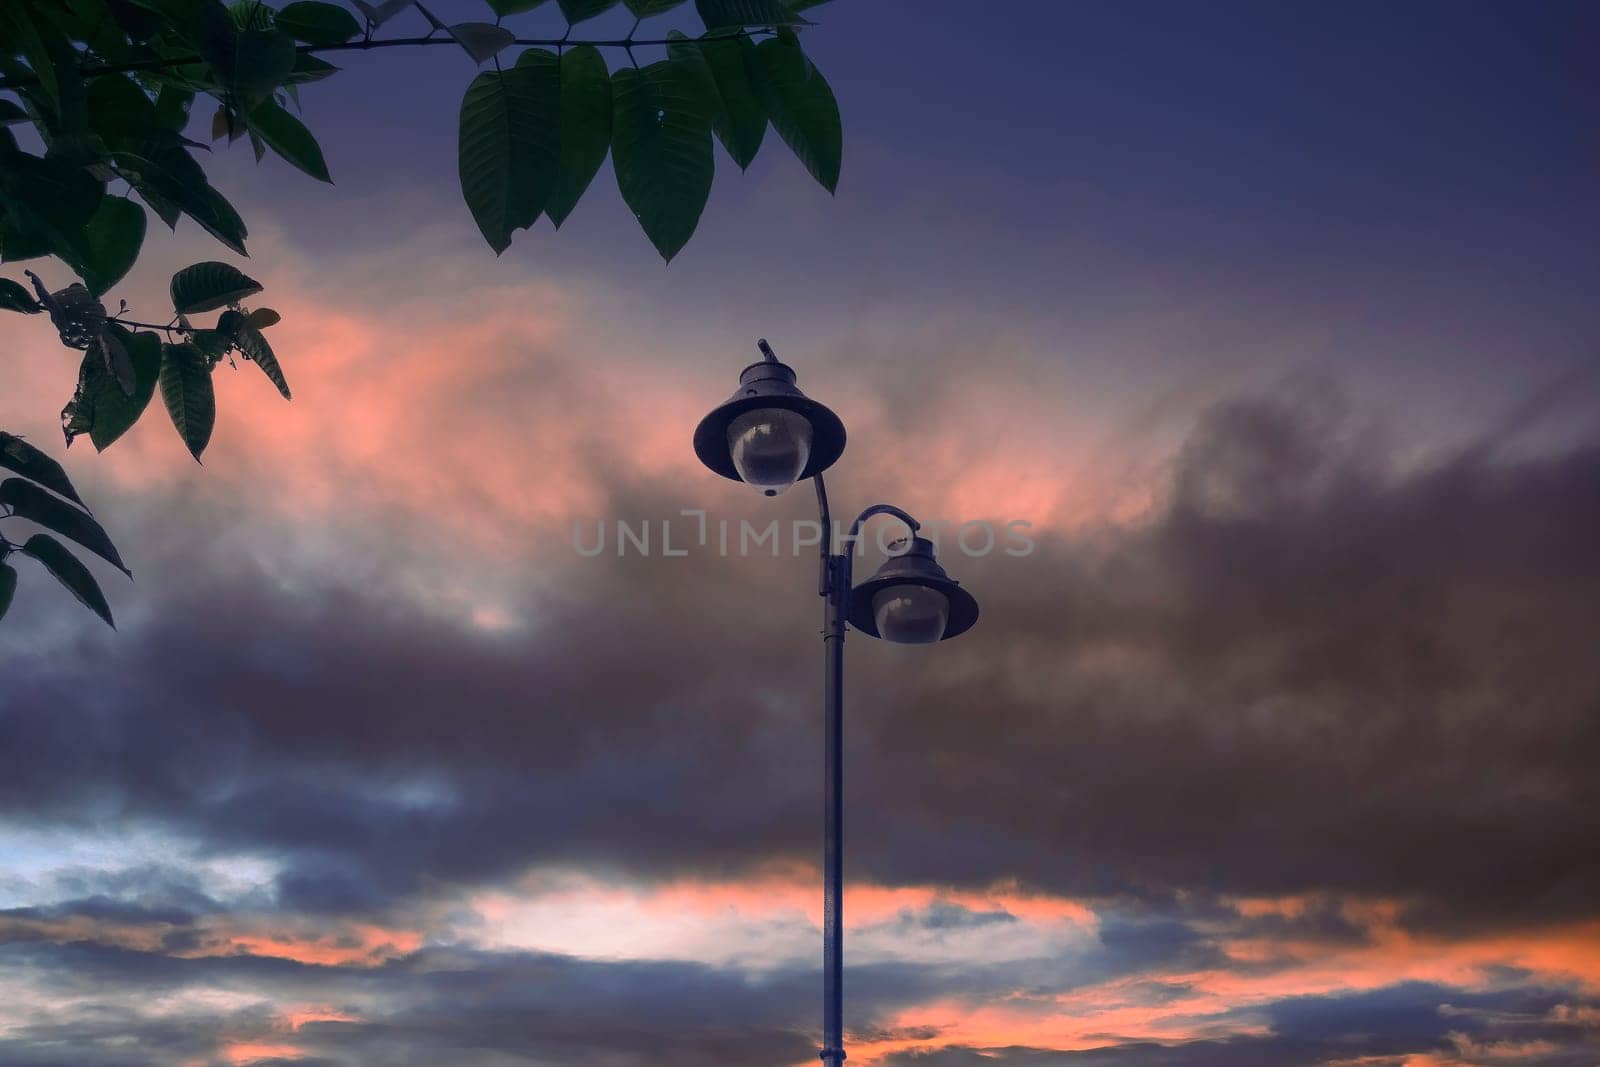 Dramatic Sky and Street Lamp in Patratu, Ranchi, Jharkhand. by apurvice123